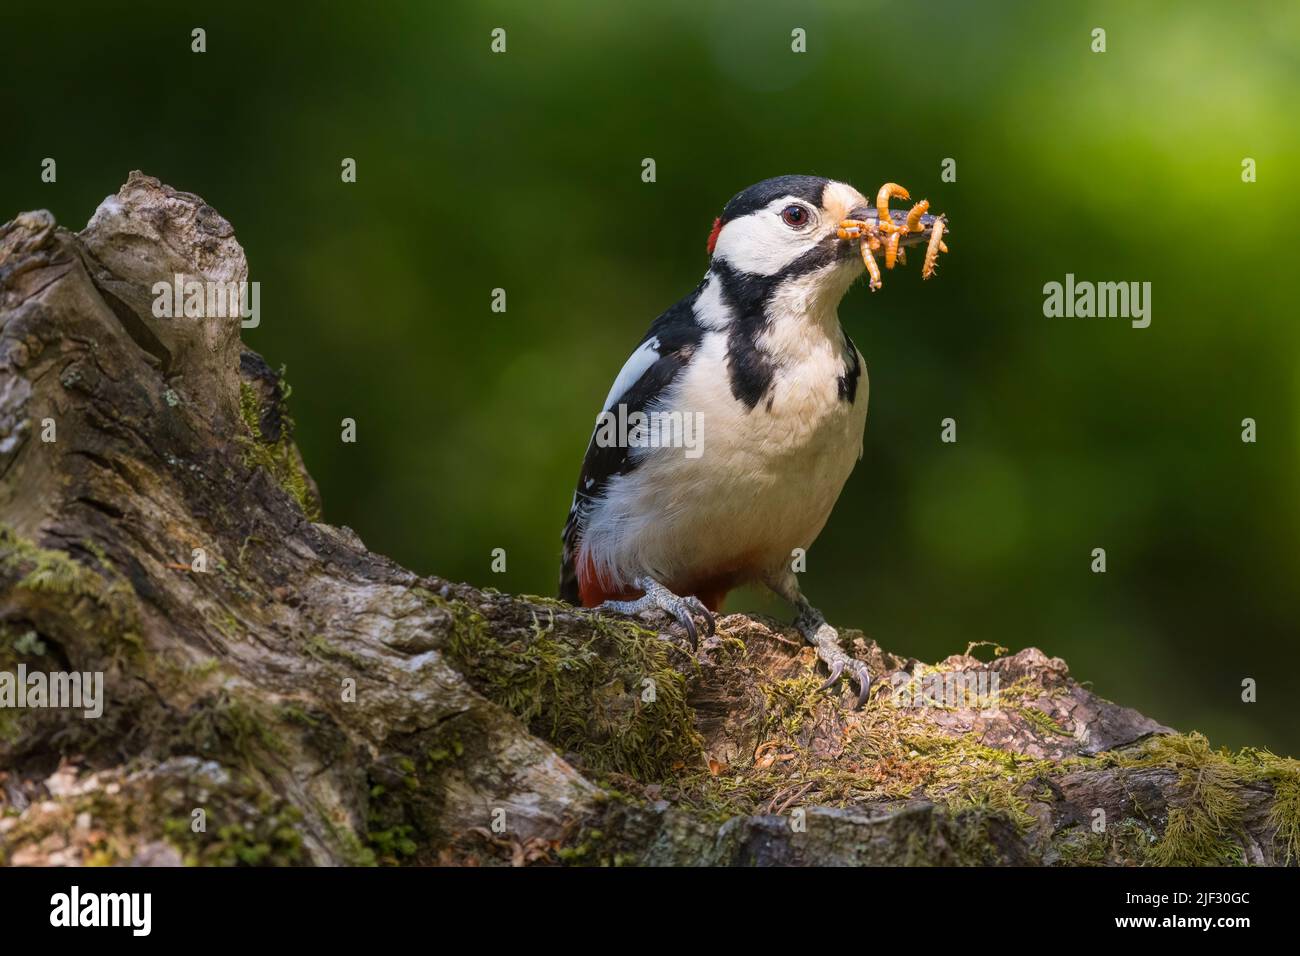 Male Great Spotted Woodpecker, Dendrocopos major, with a beak full of grubs, Dumfries & Galloway, Scotland Stock Photo